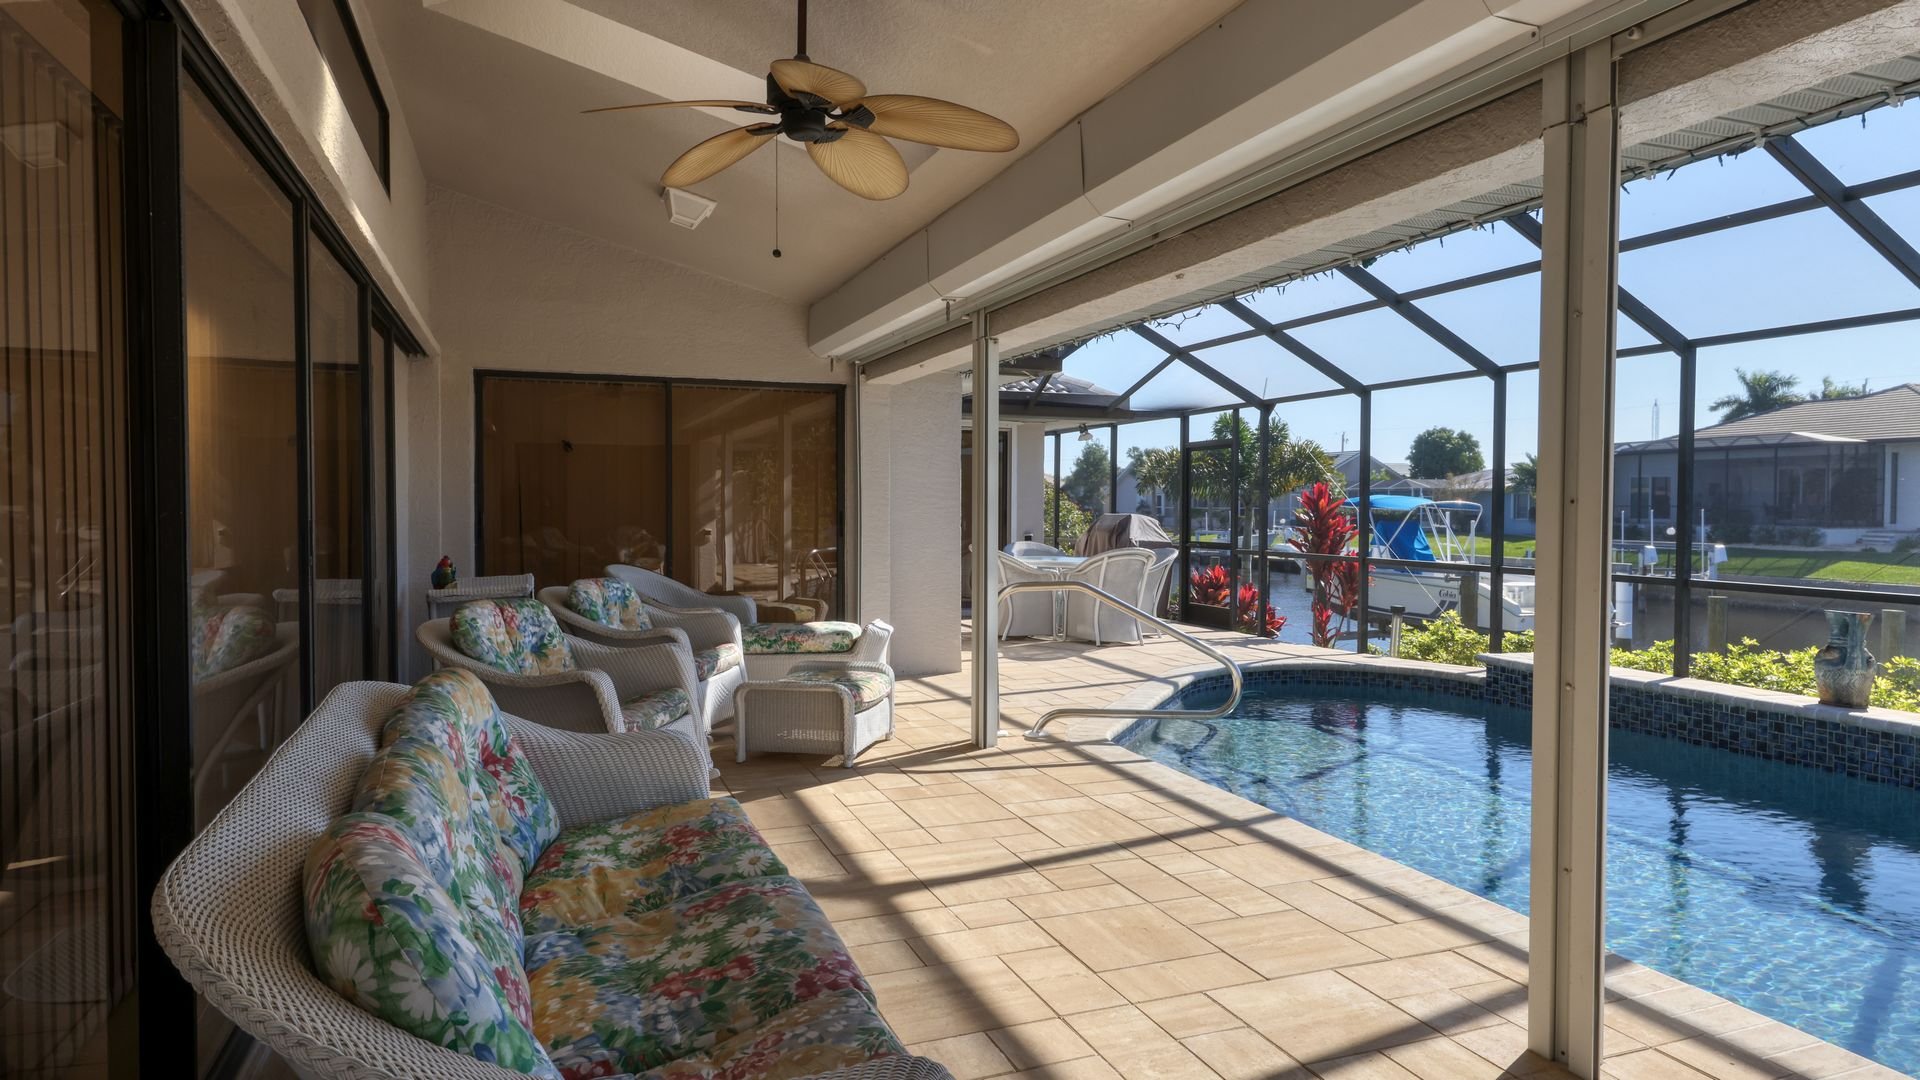 Gorgeous covered seating space to truly enjoy the outdoors overlooking the canal and pool. Enclosed lanai